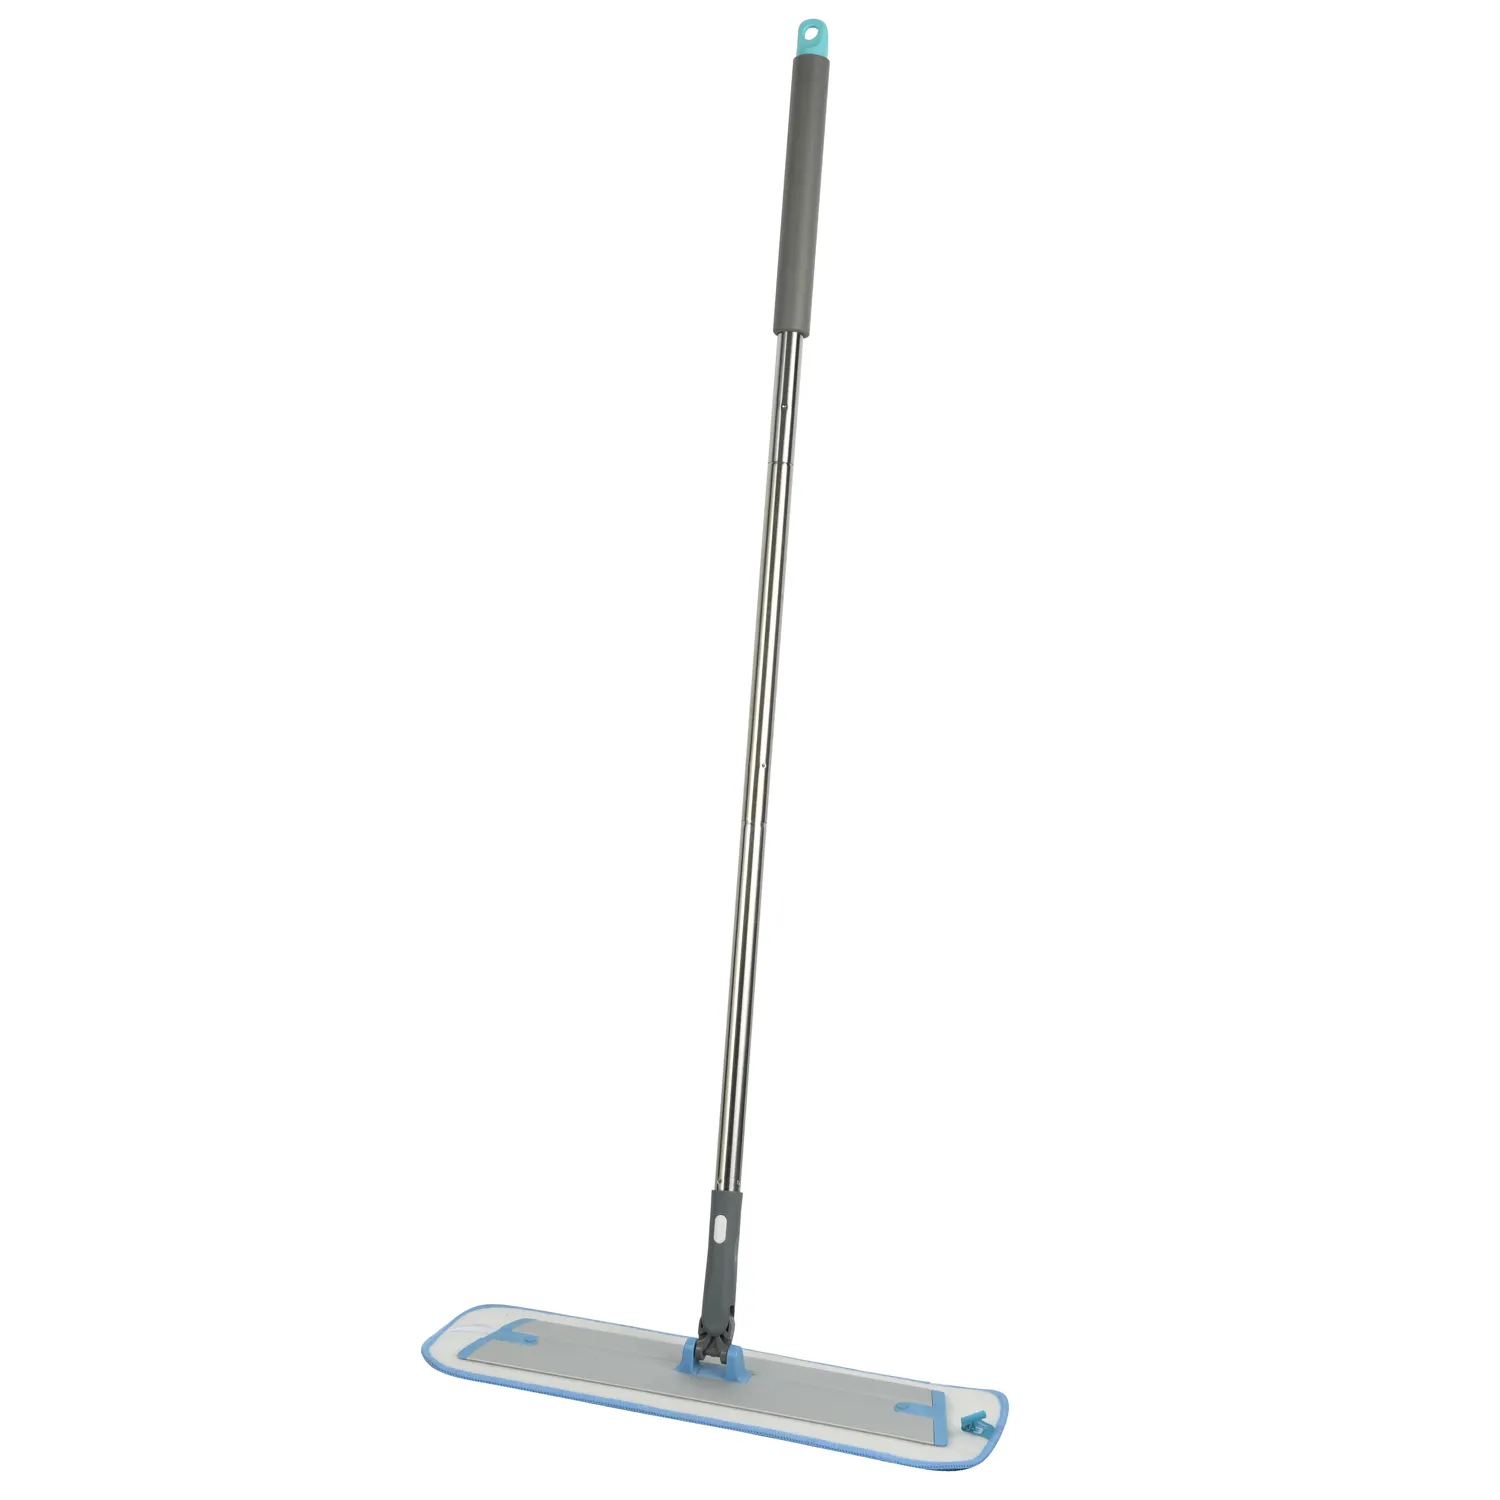 Dust Flat Mop Household Lazy Mop Floor Fast Dry Cleaning Mop